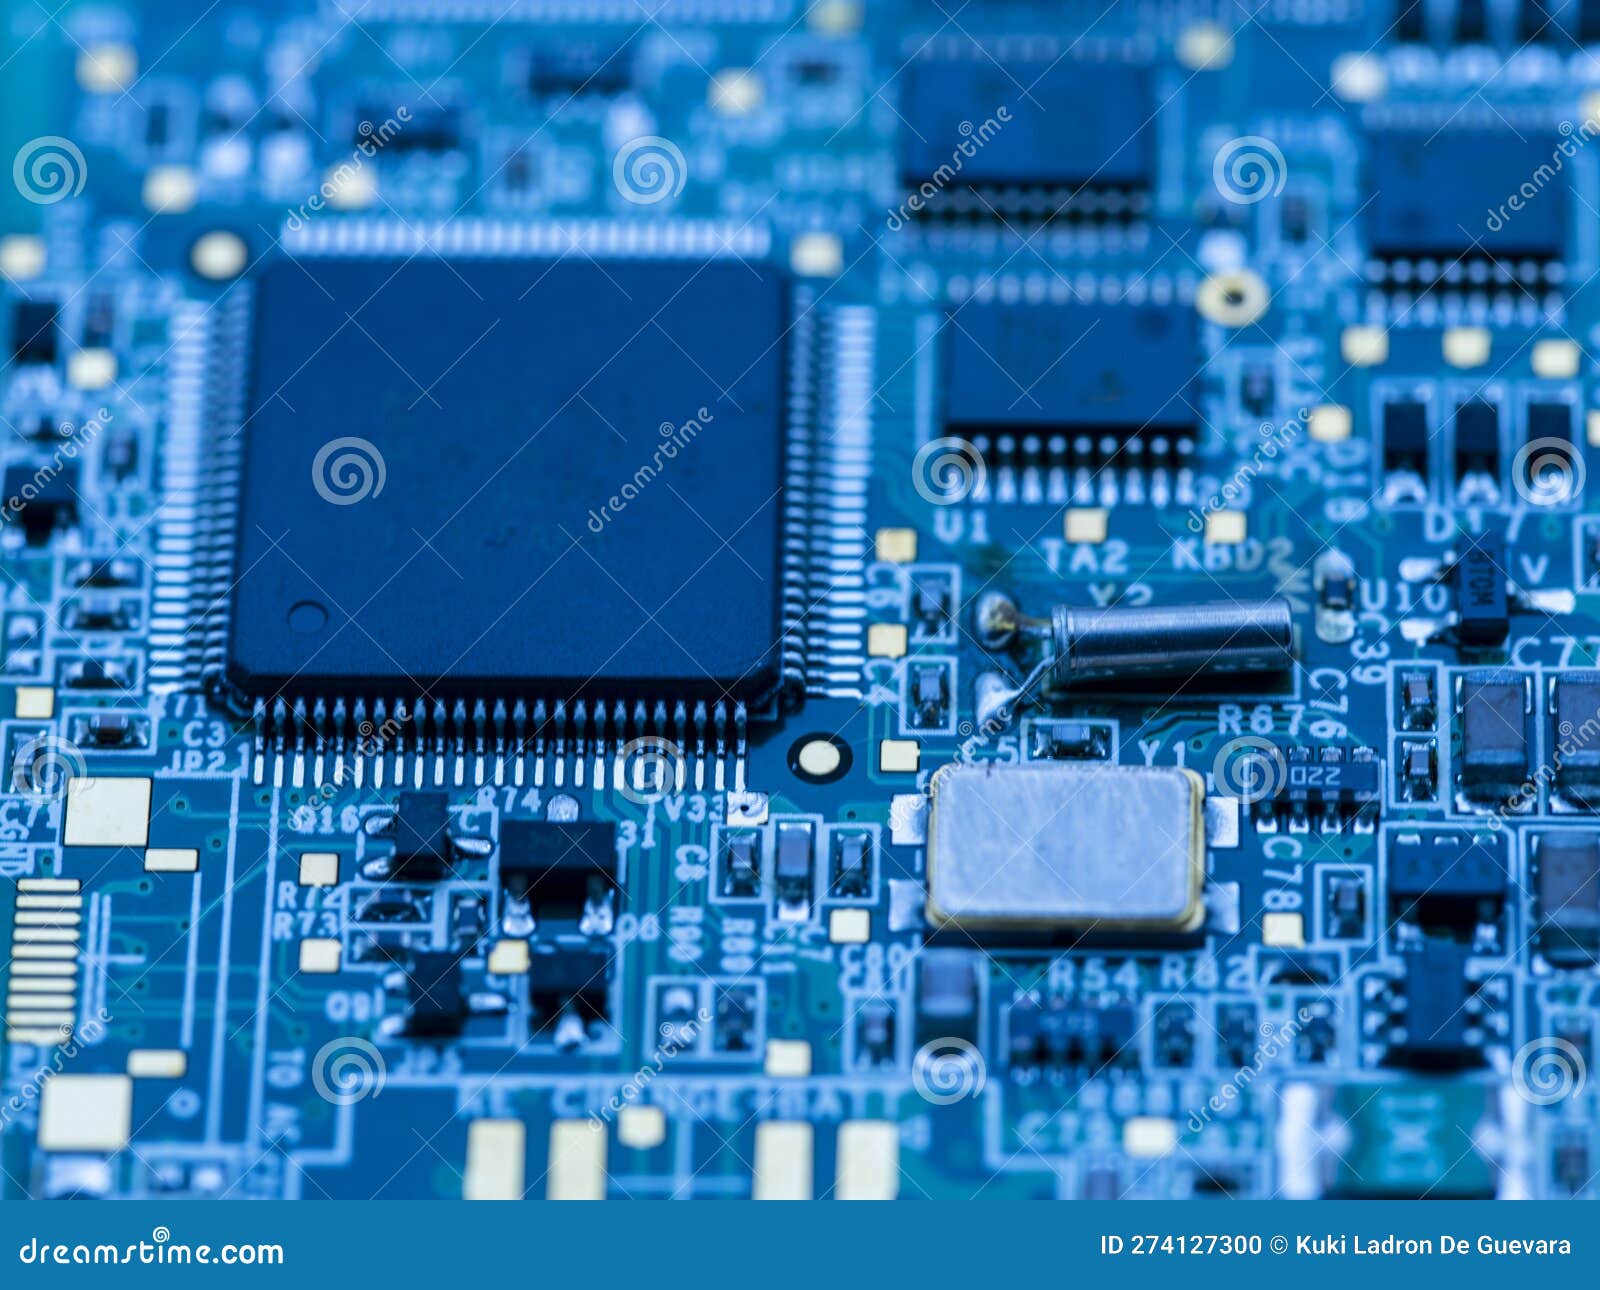 detail of some of the components on an electronic board